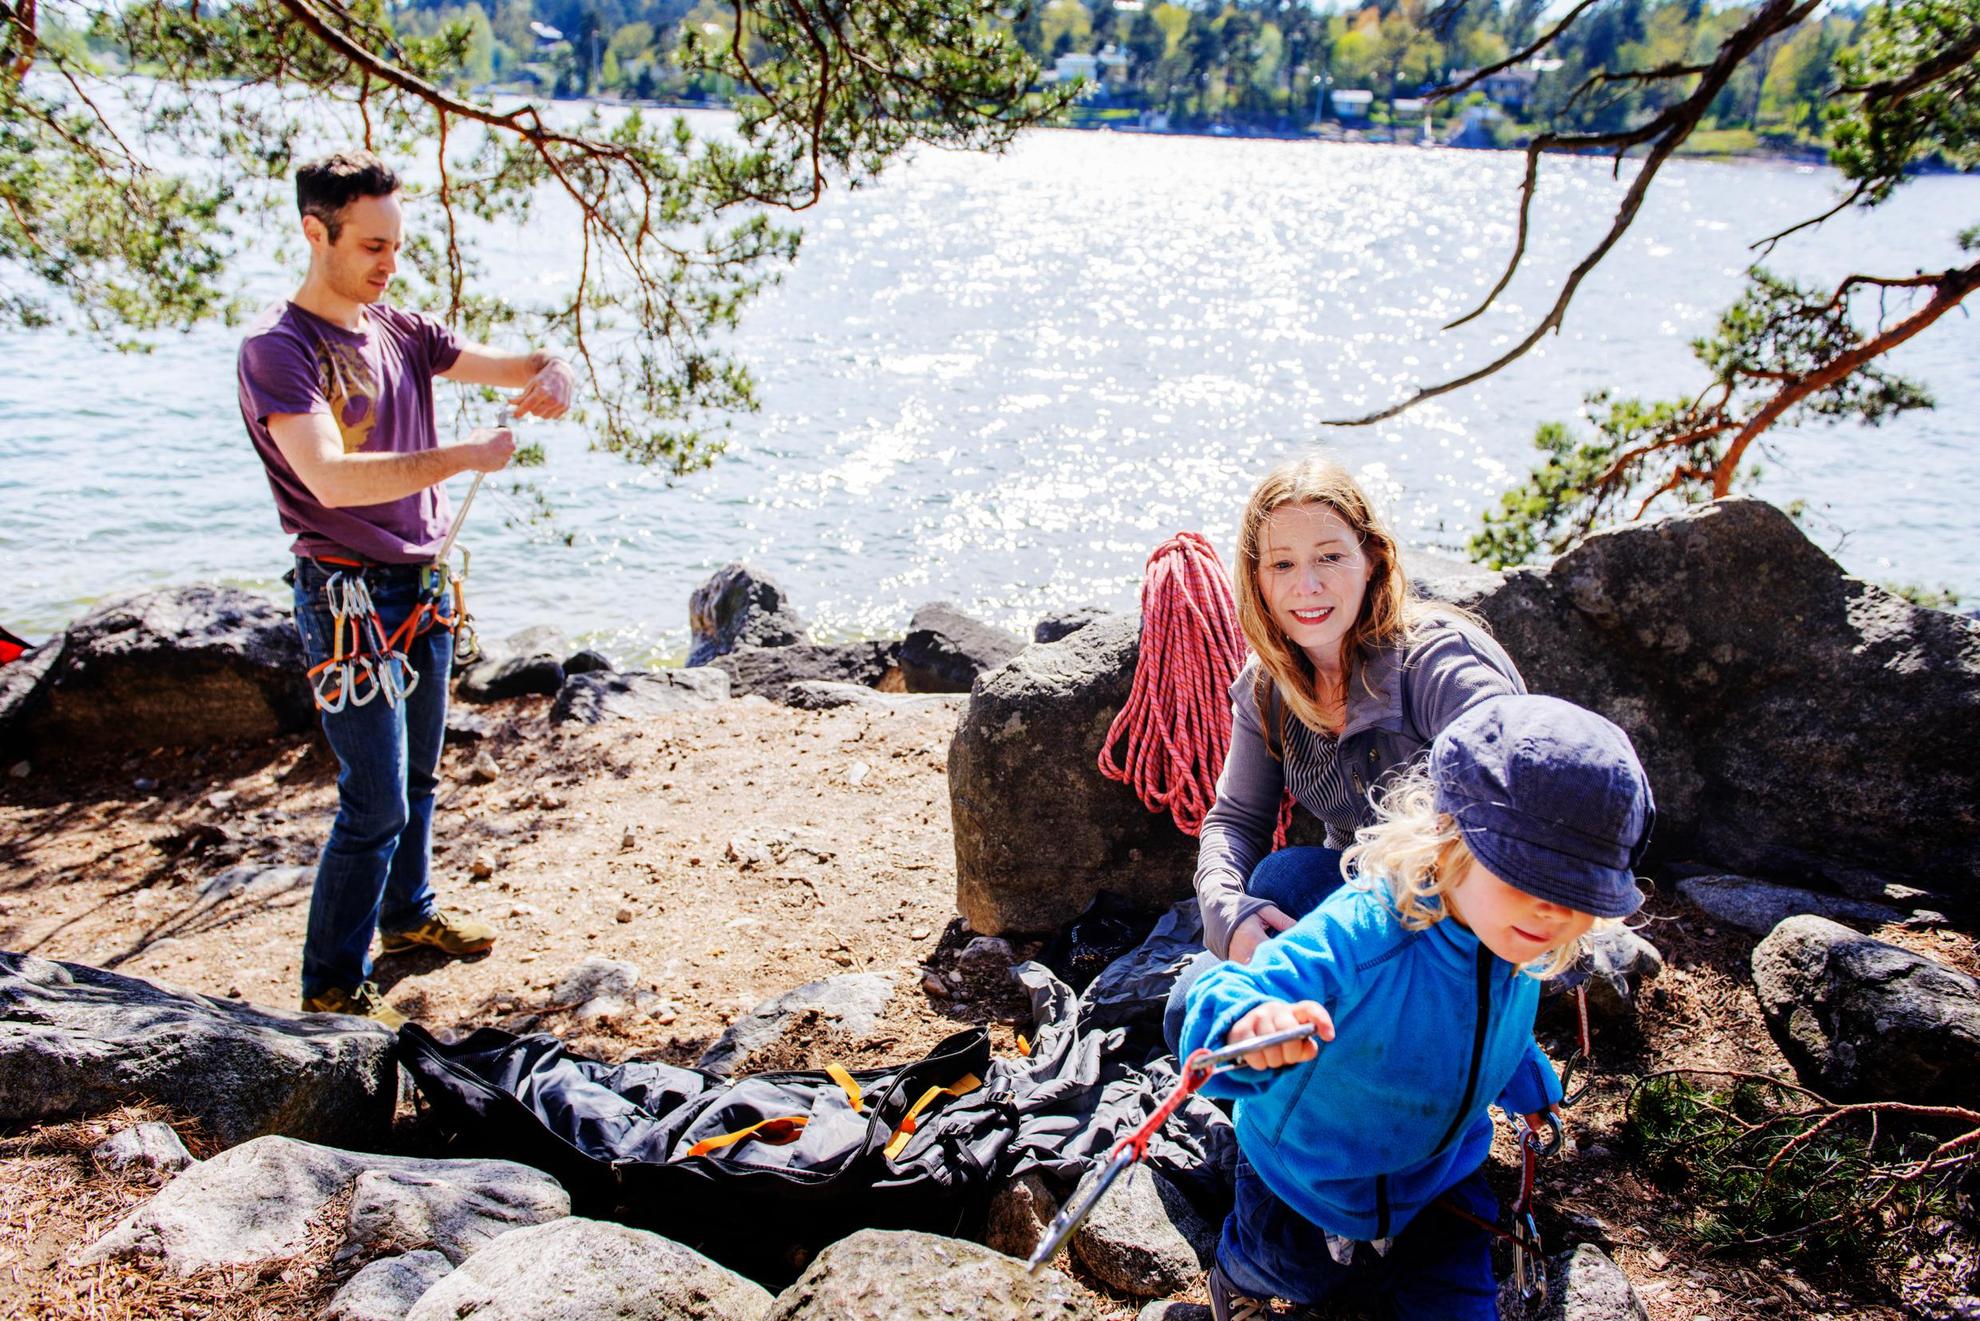 A family by a lake in Bohuslän. The man is preparing his gear. A woman watches a child run away with carabiners in his or her hand.